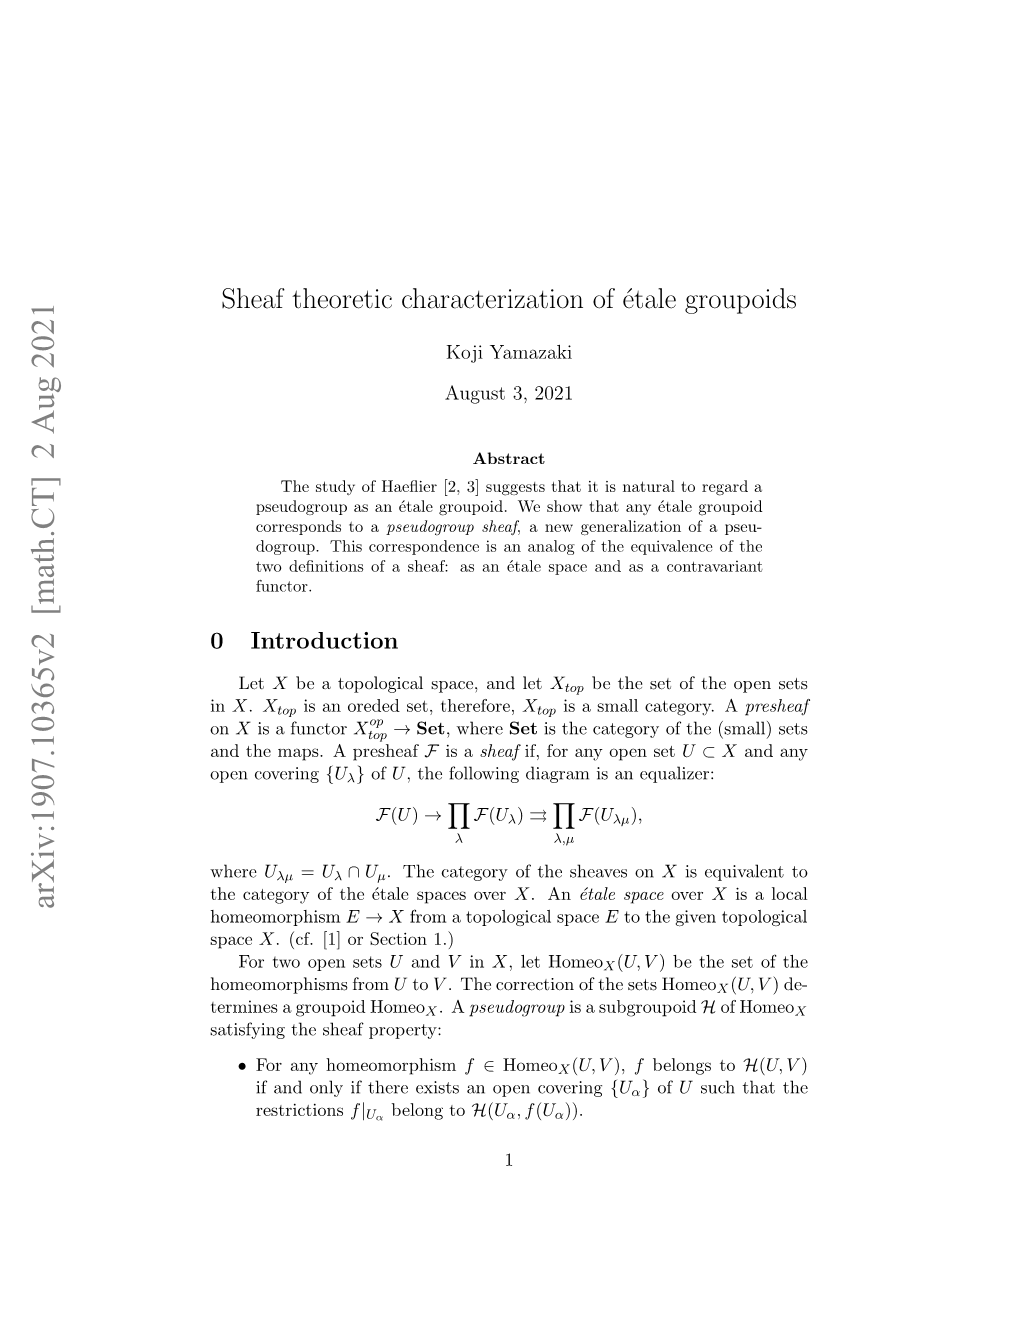 Sheaf Theoretic Characterization of Étale Groupoids